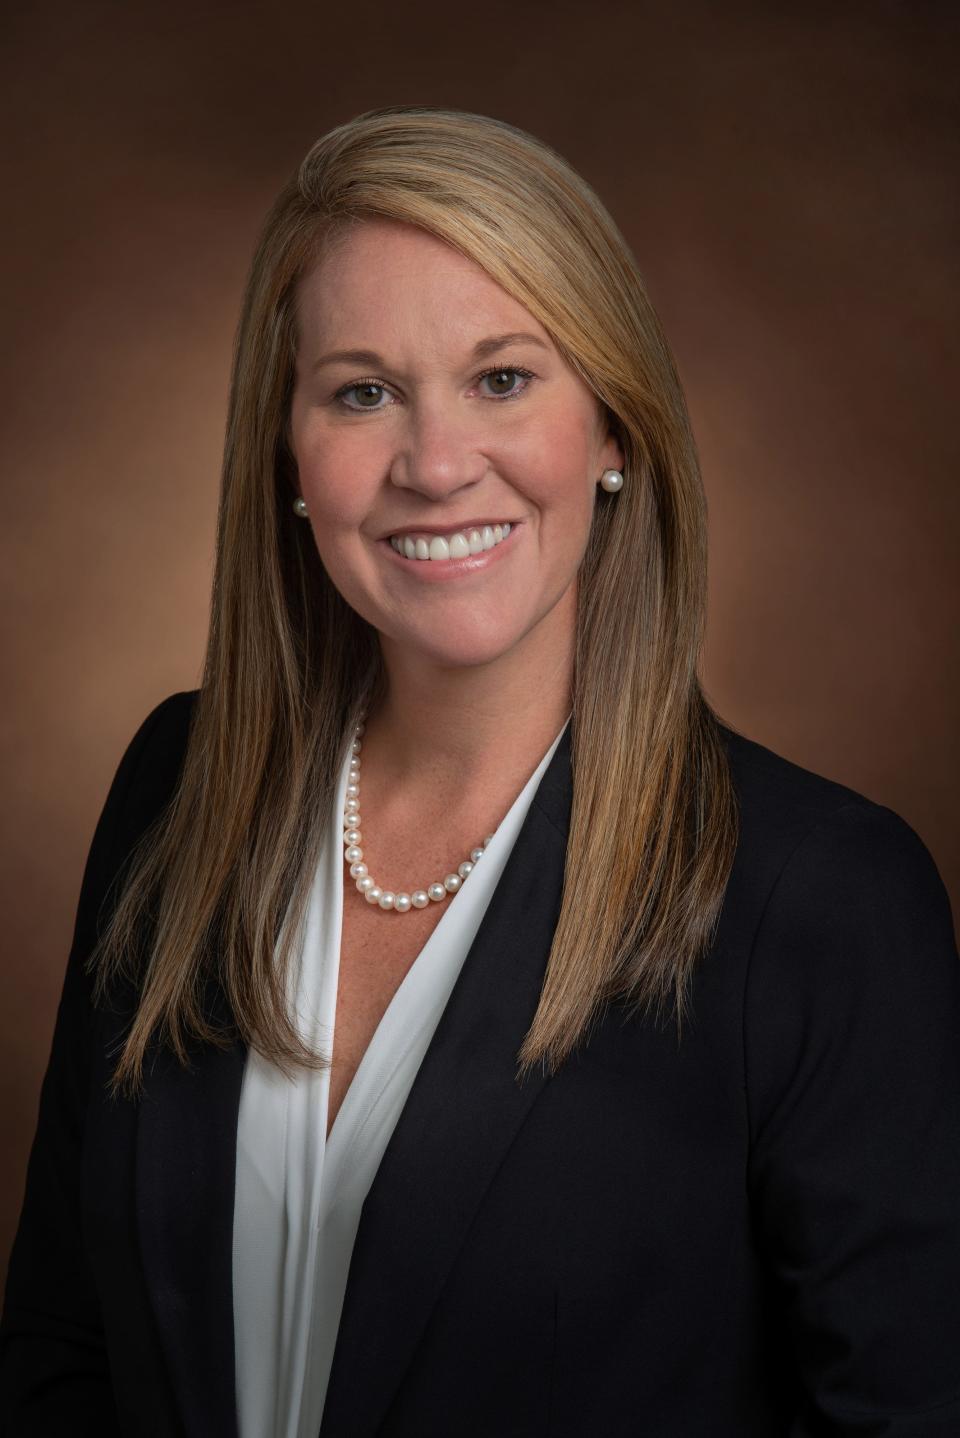 Republican Sarah Lodge, currently the chairwoman of the Sarasota County Public Hospital Board, filed for a second term in the Central District Seat 1 seat.